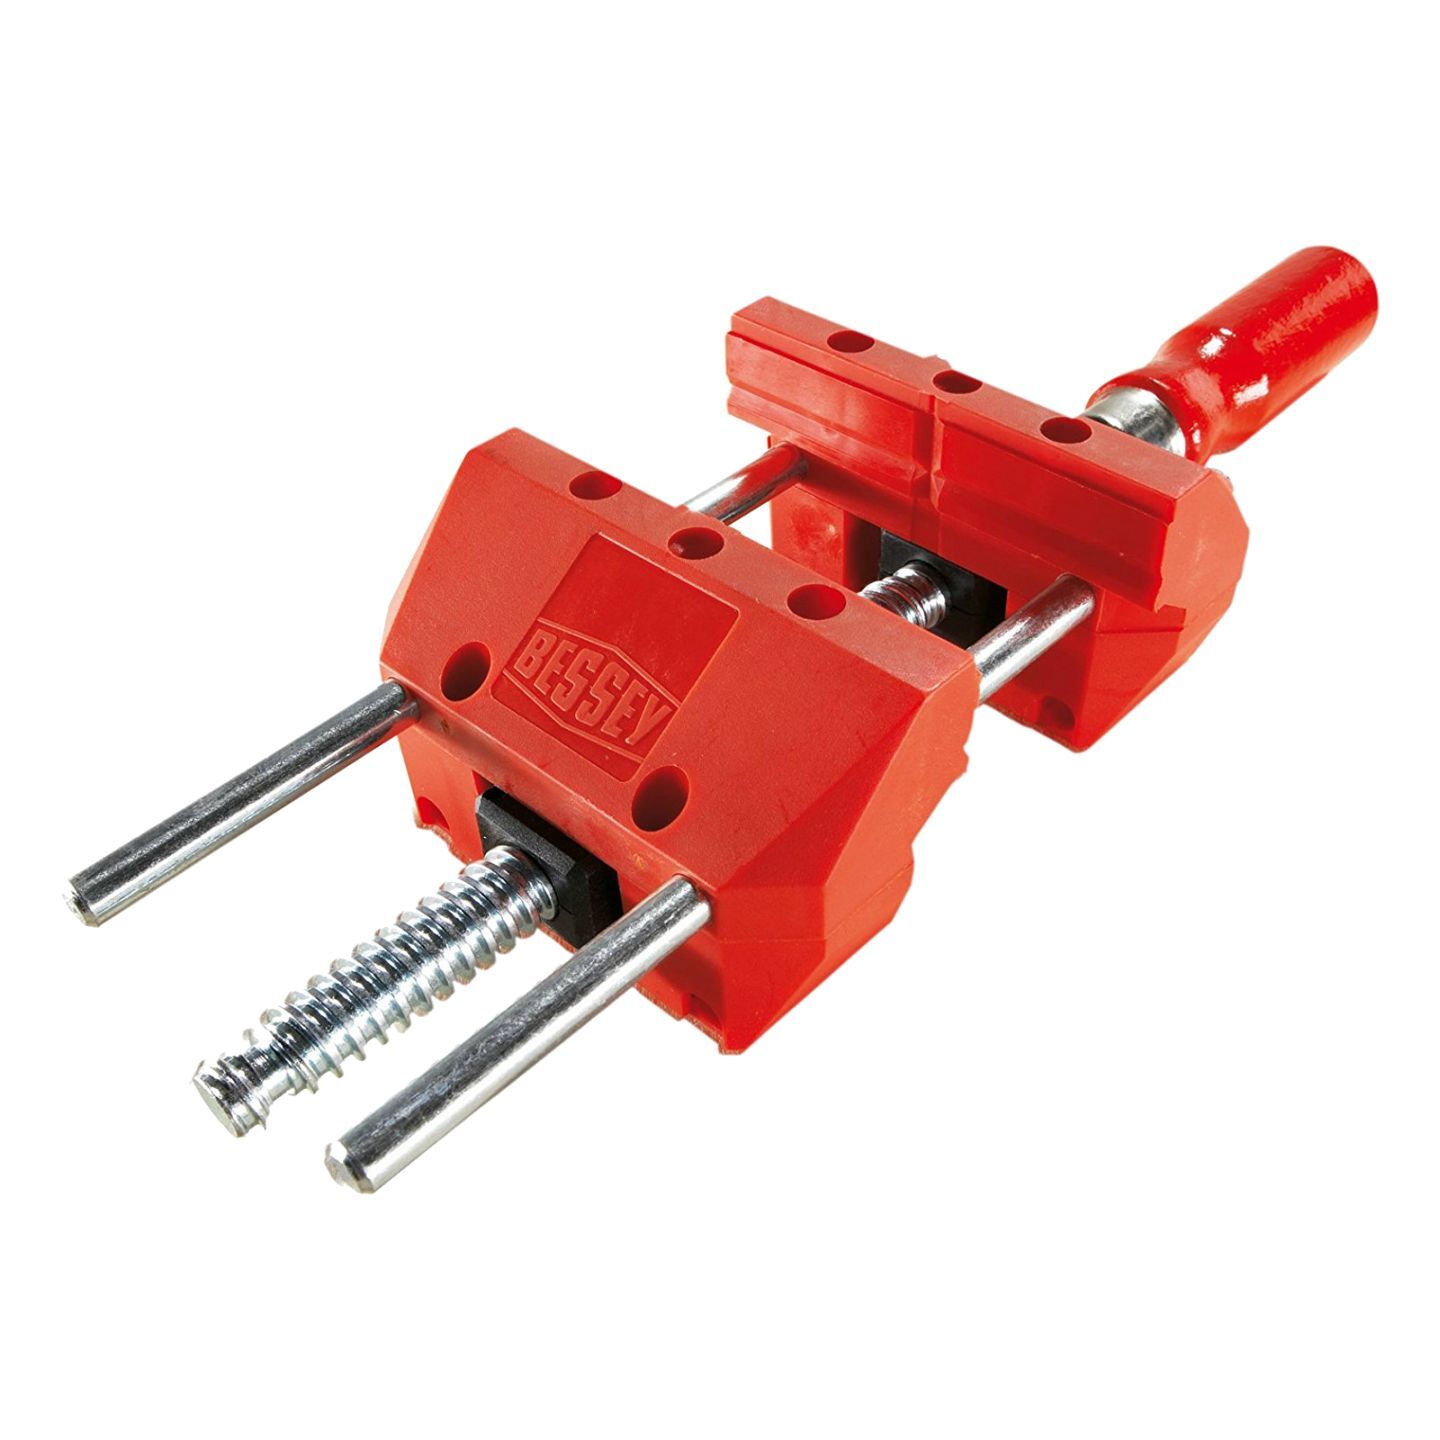 Bessey S10-ST Mini Vise Clamp Set with Table Clamp